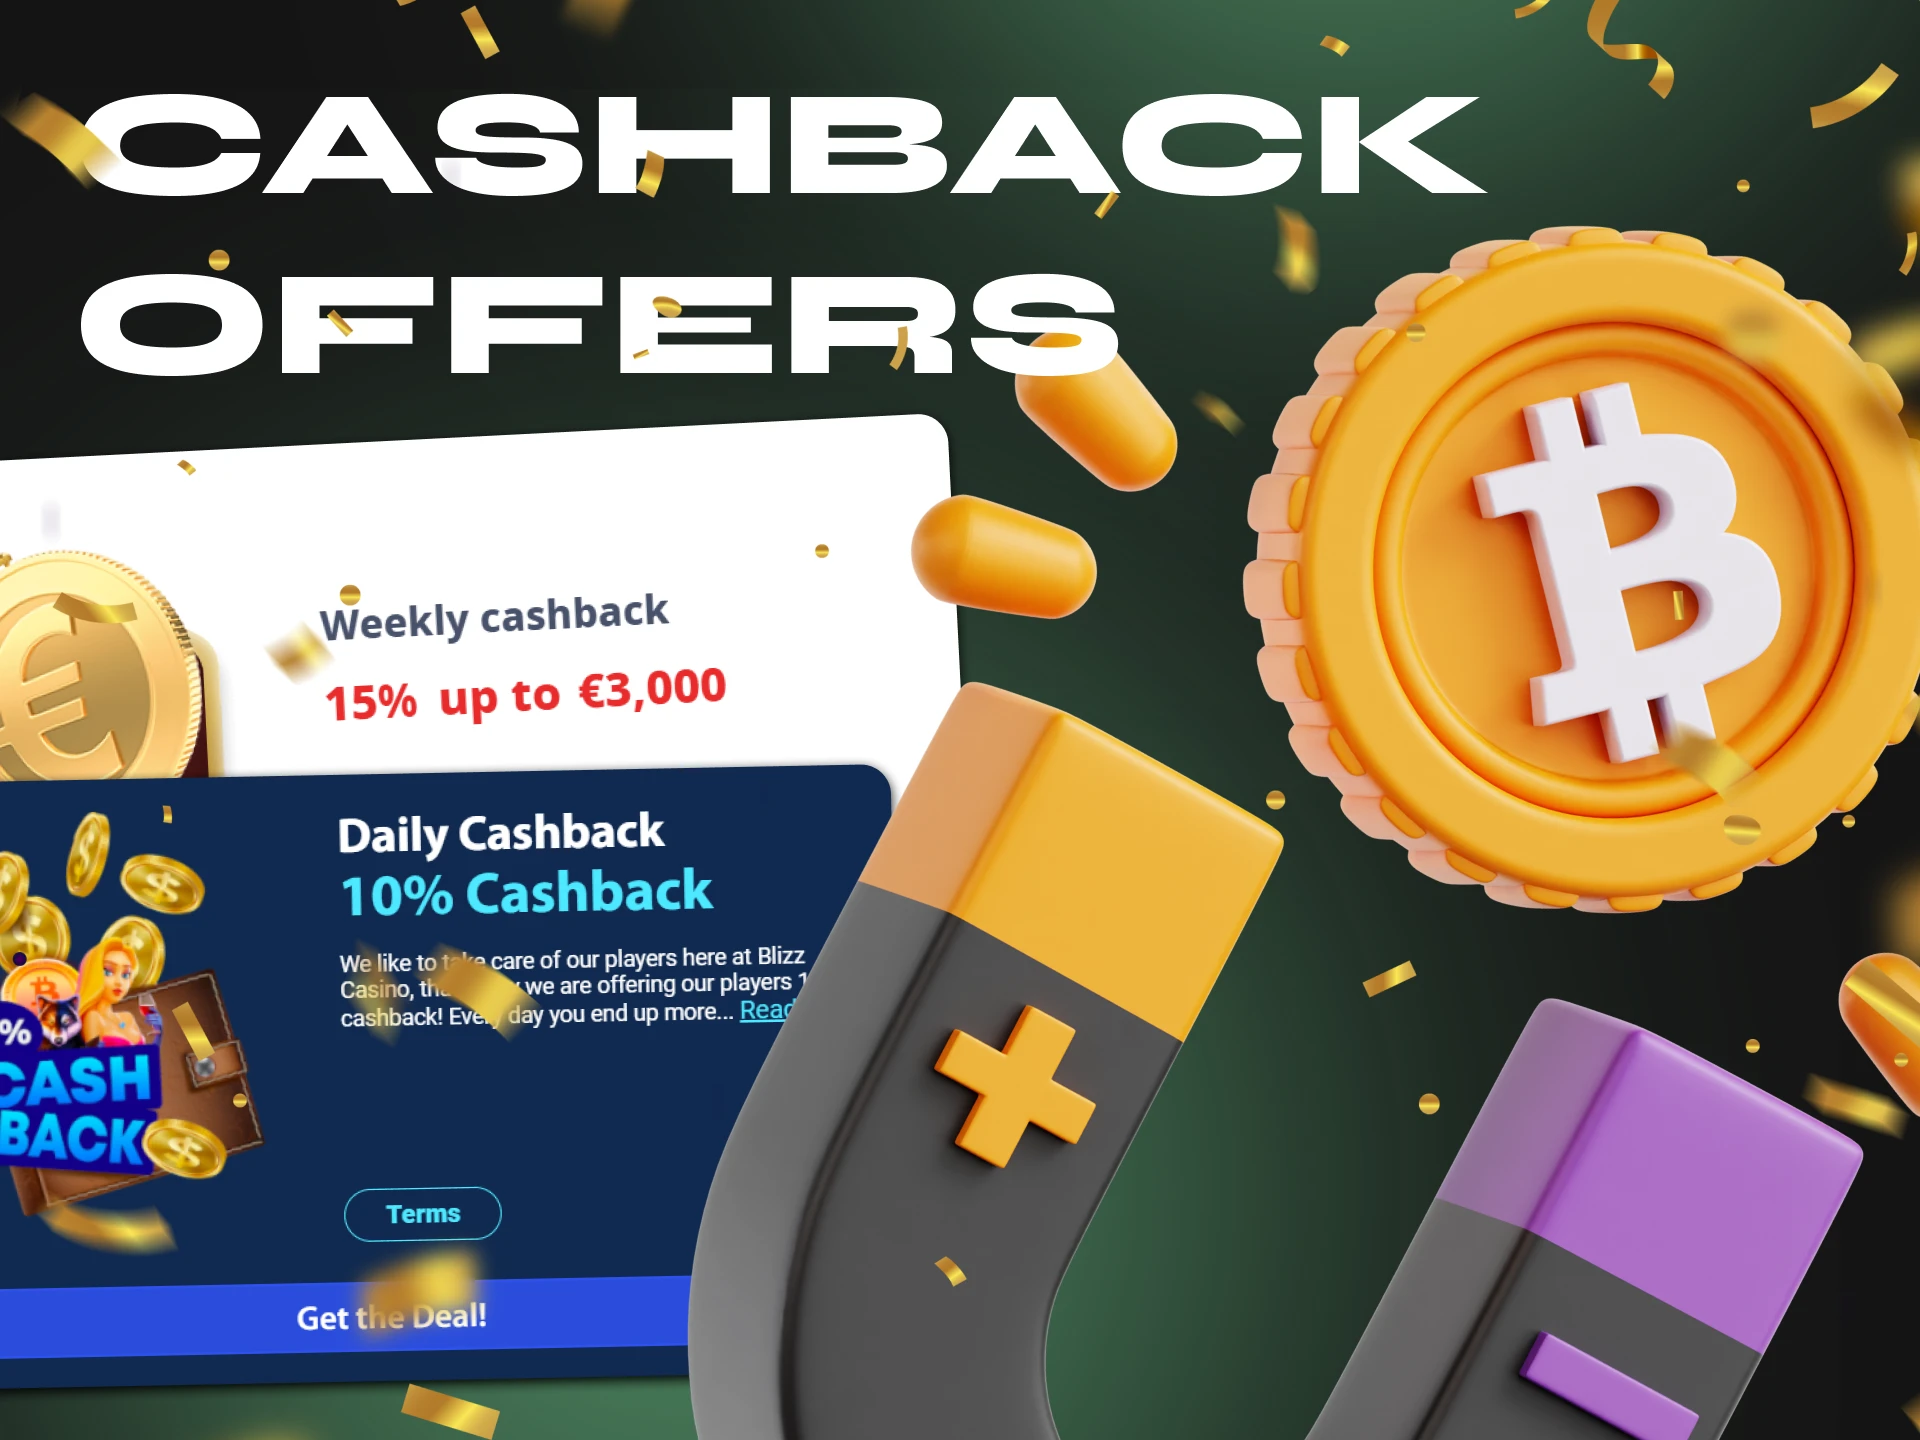 At Crypto casino you can get your money back by receiving a cashback bonus.